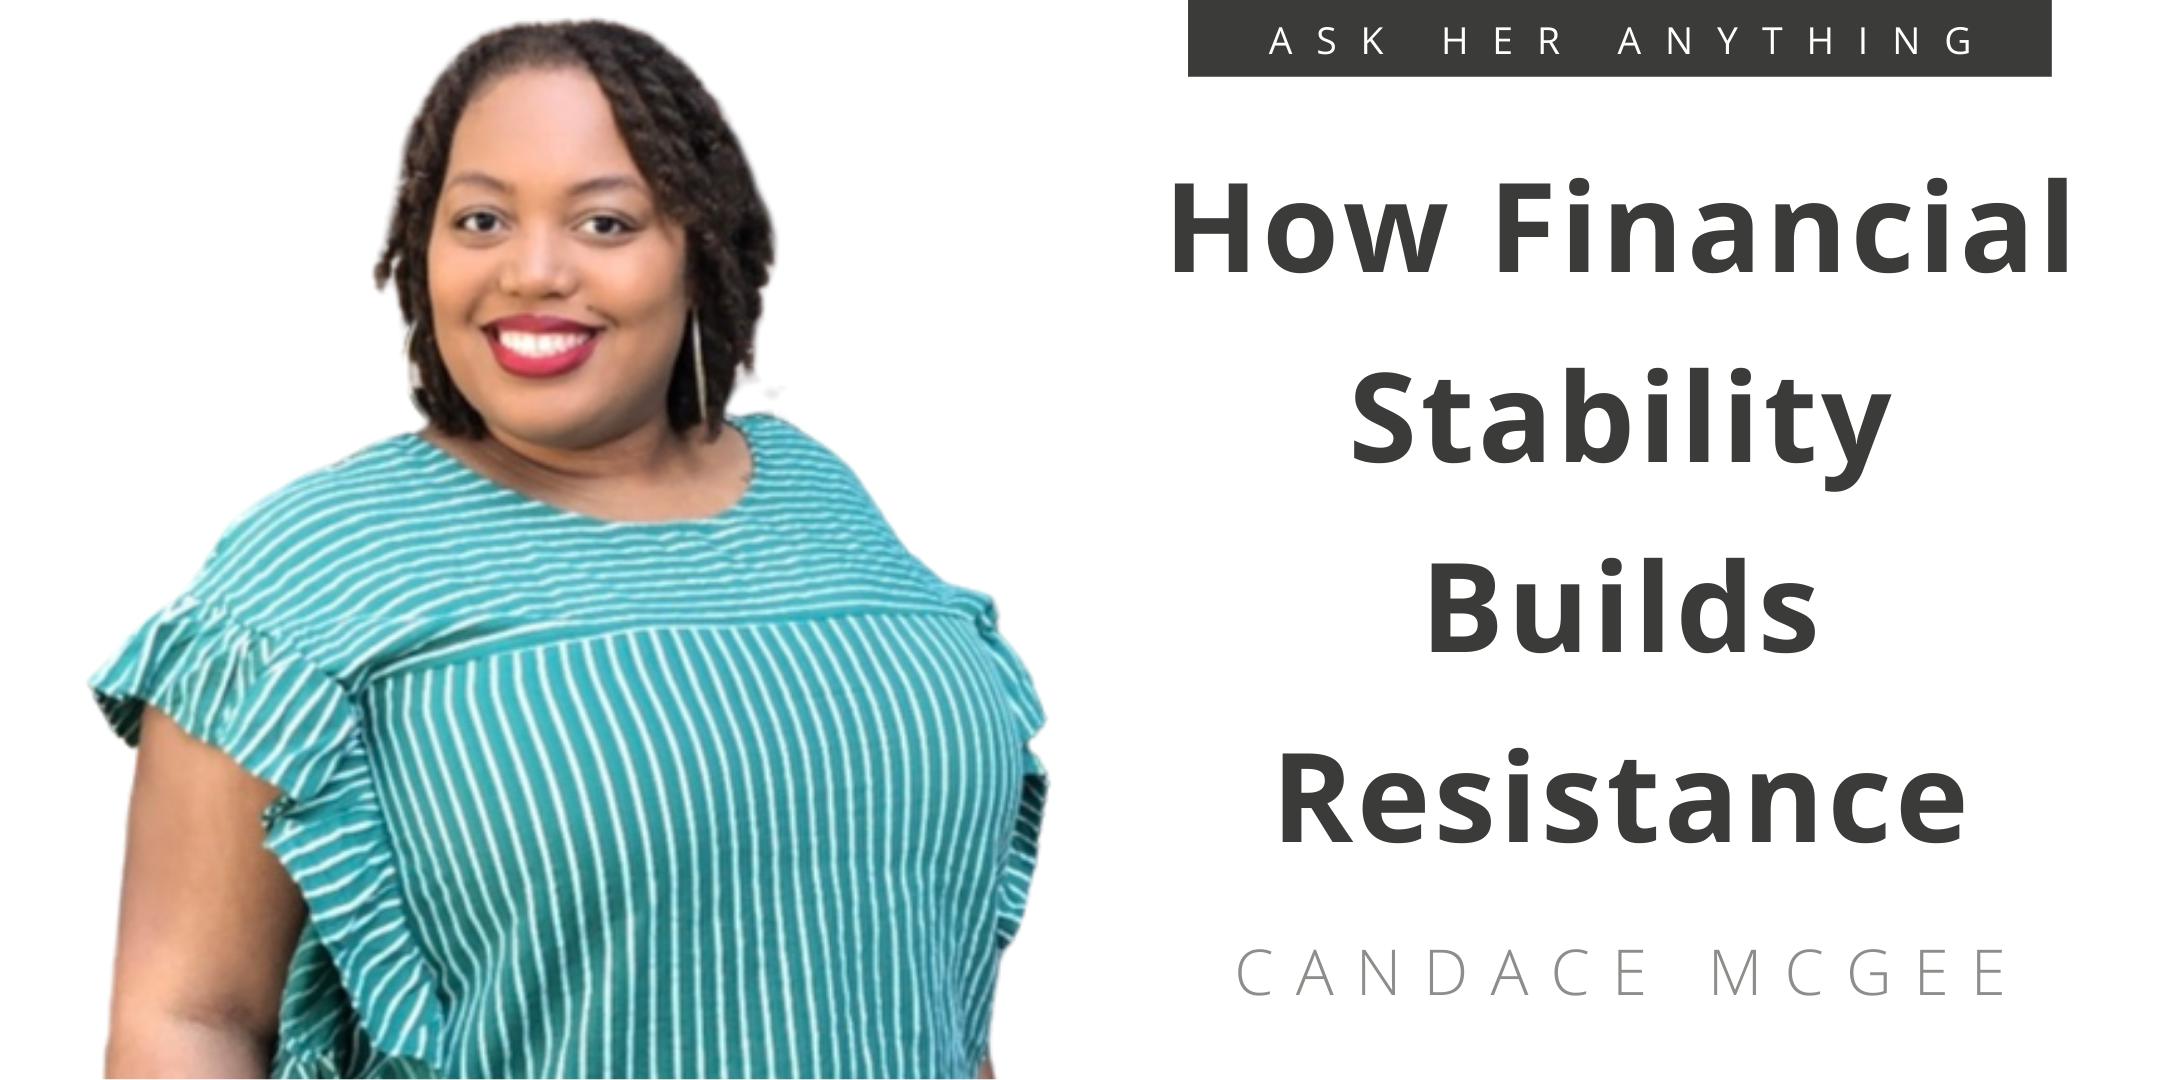 How Financial Stability Builds Resistance